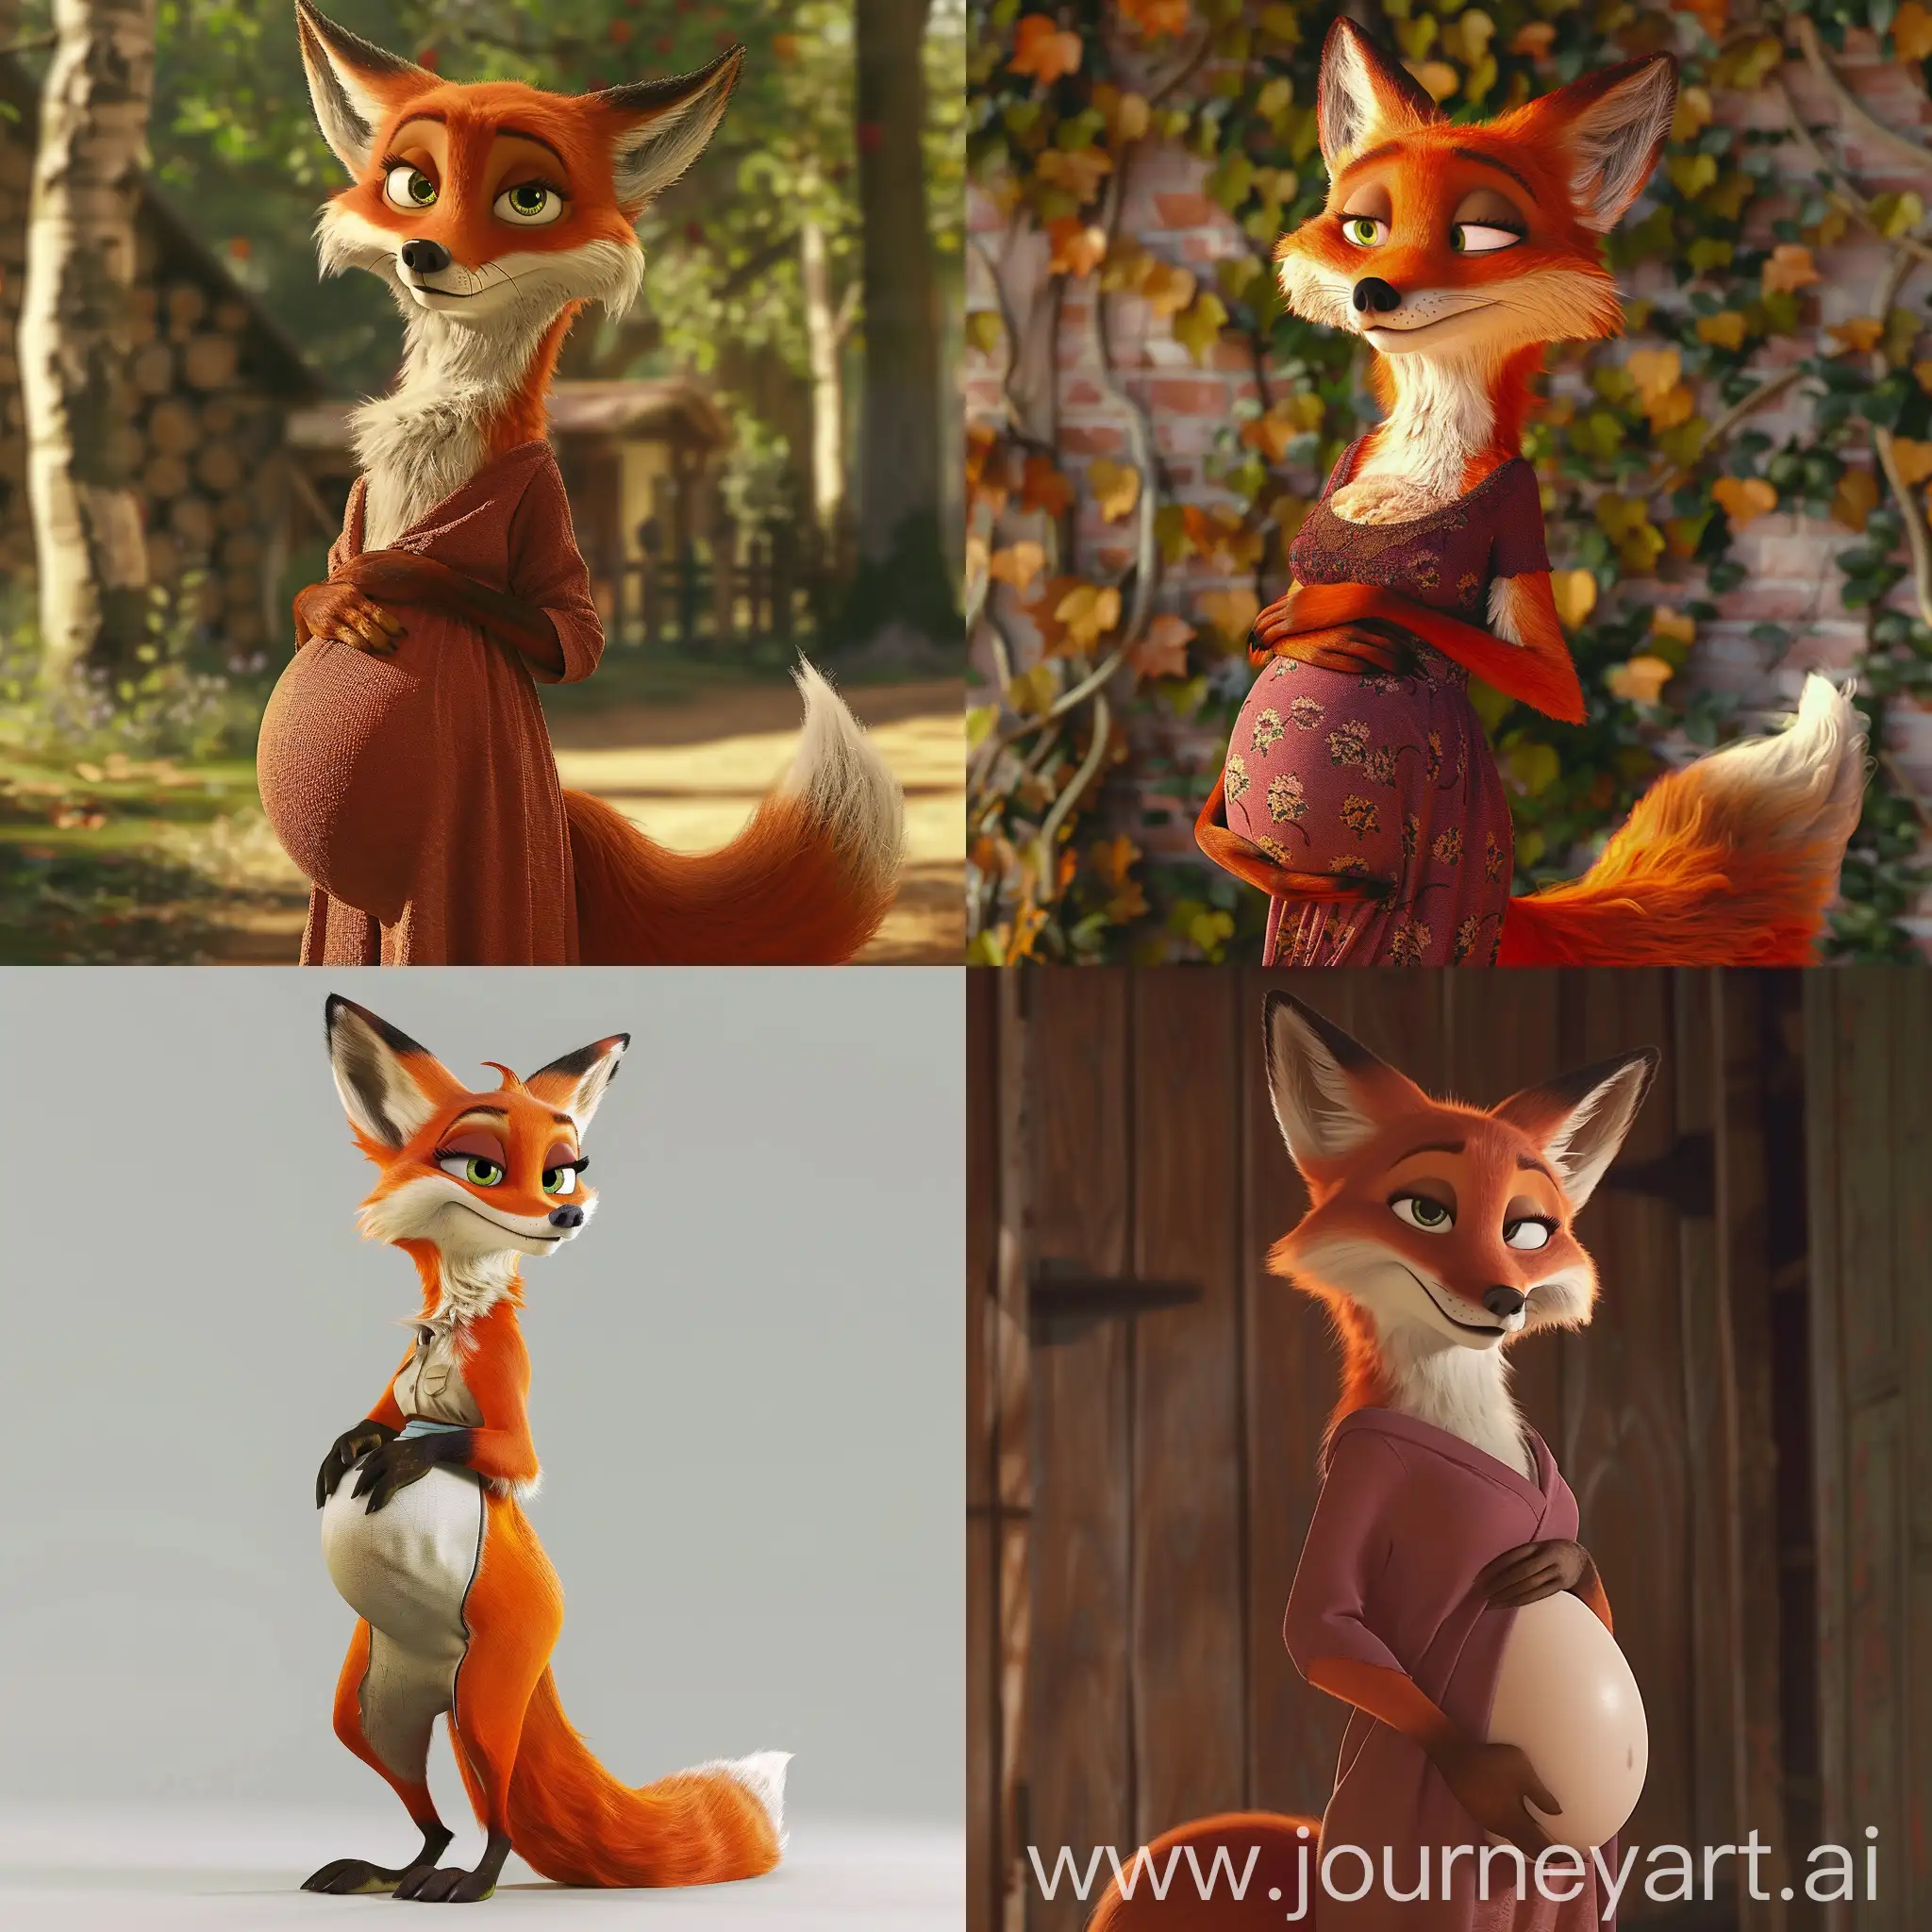 pregnant fox woman character from a puxar animated film